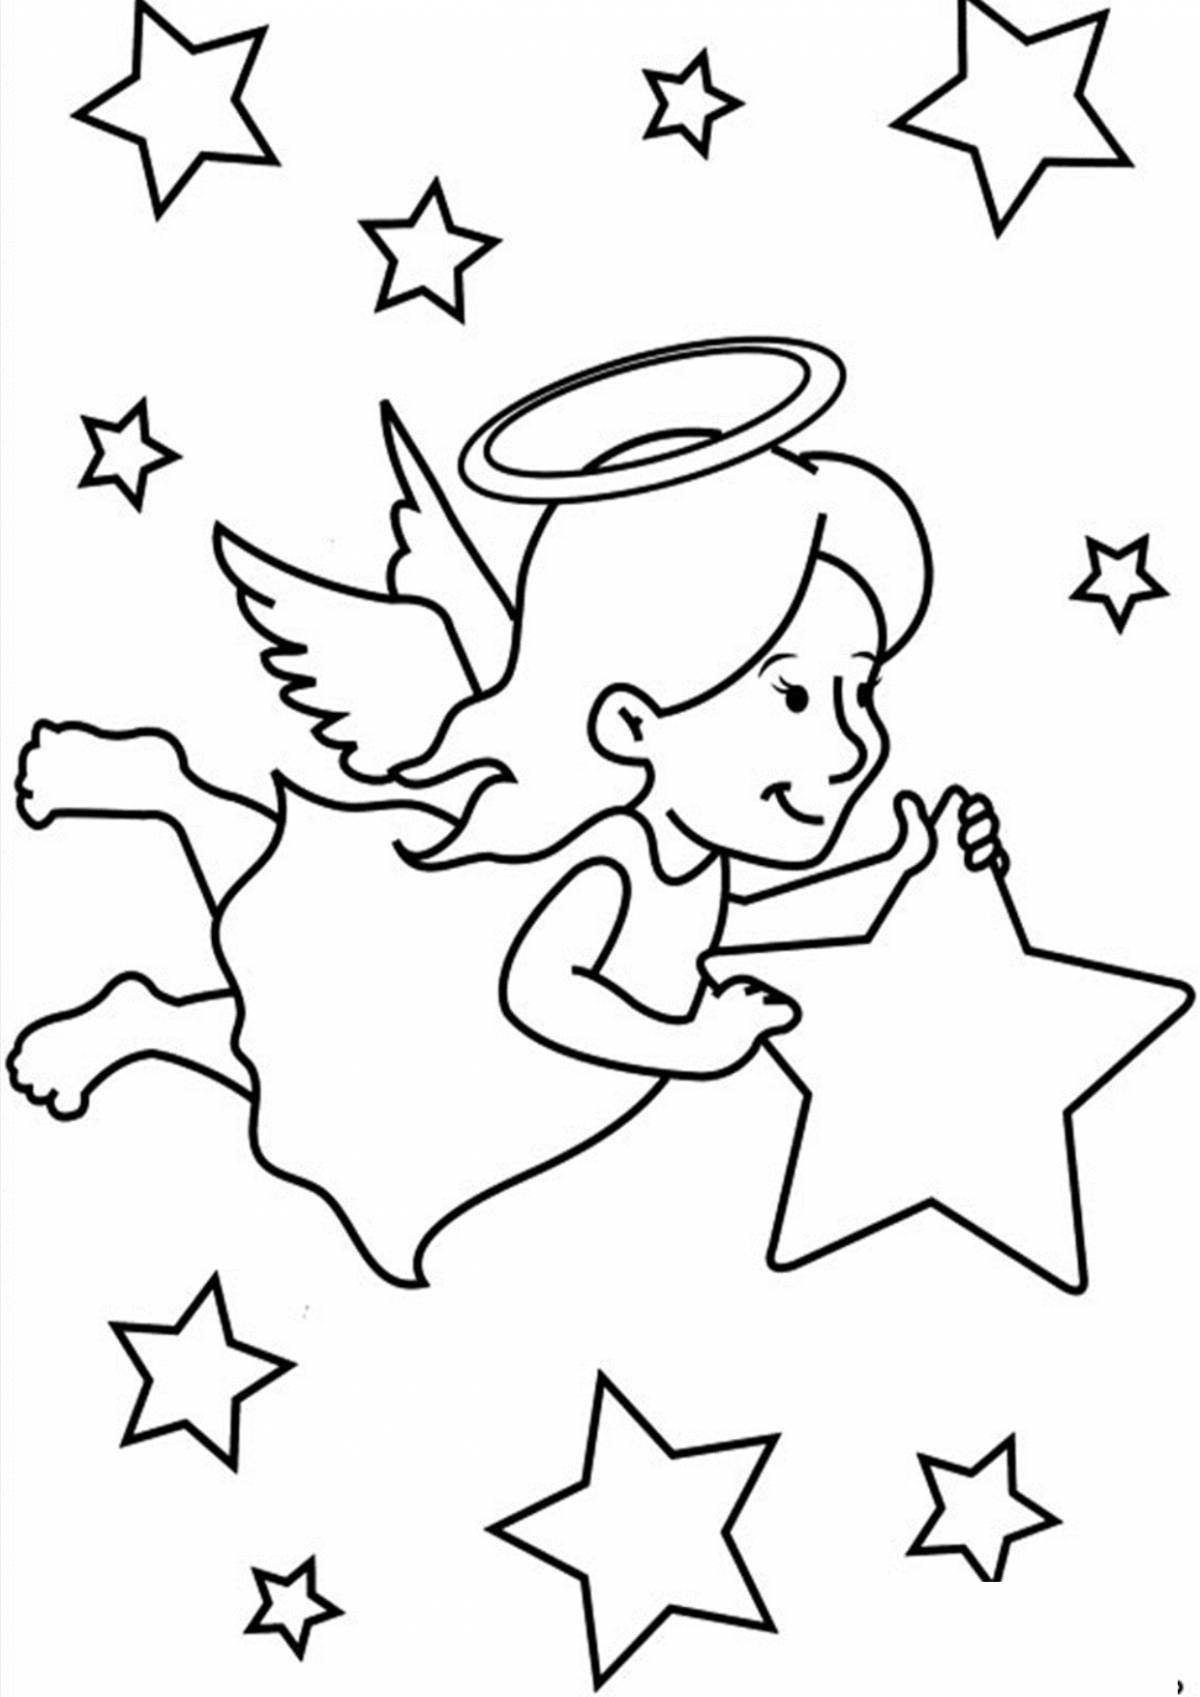 Glorious Star of Bethlehem coloring pages for kids